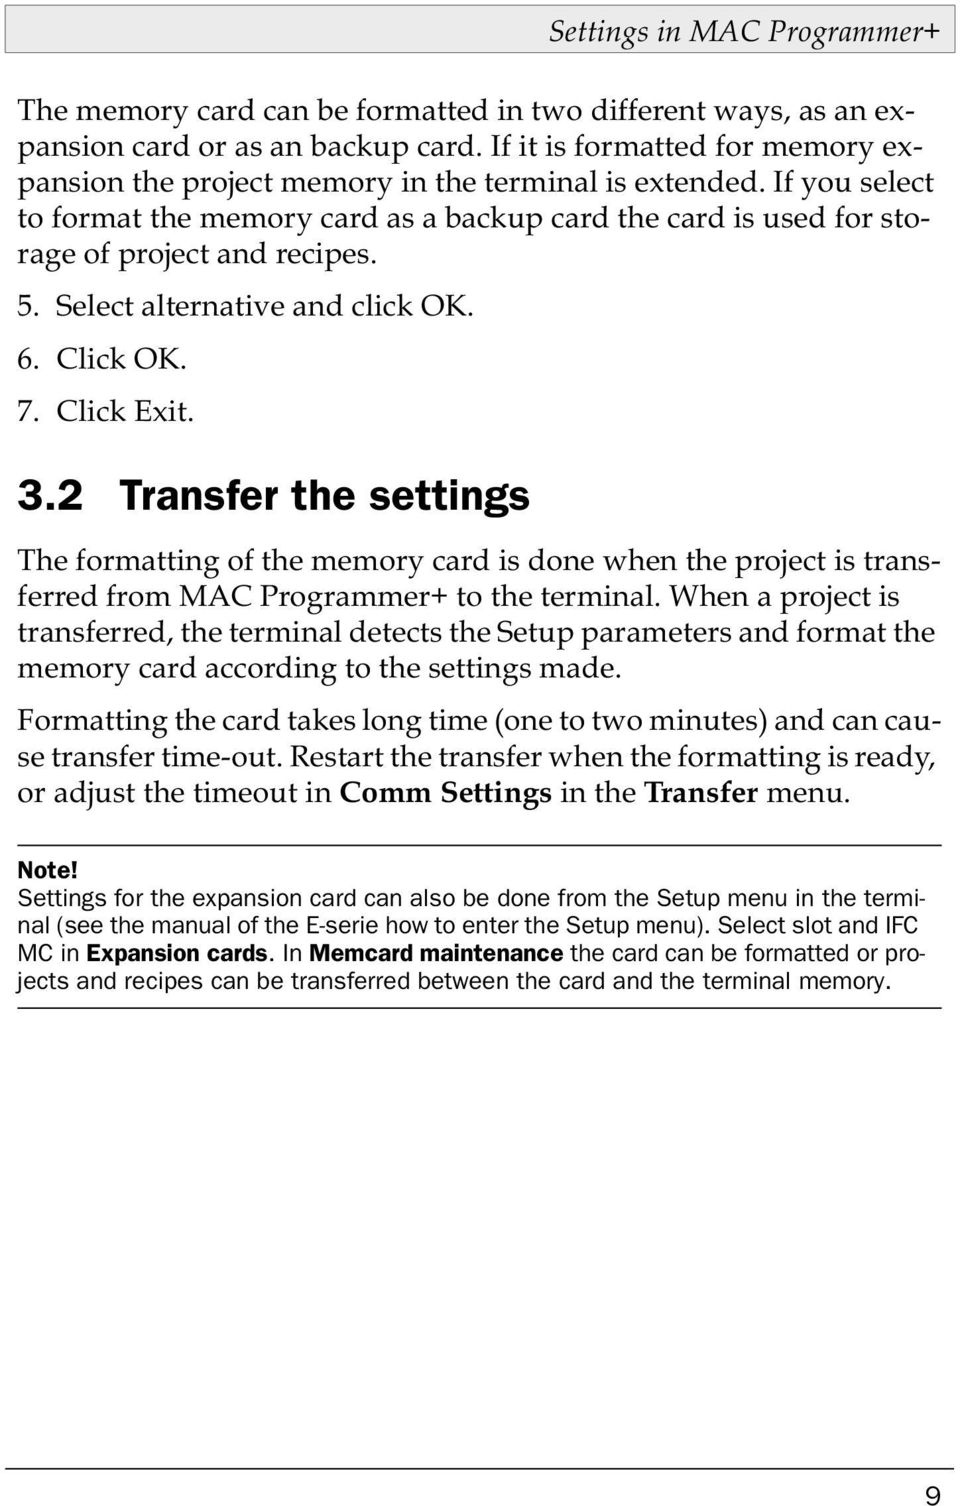 Select alternative and click OK. 6. Click OK. 7. Click Exit. 3.2 Transfer the settings The formatting of the memory card is done when the project is transferred from MAC Programmer+ to the terminal.